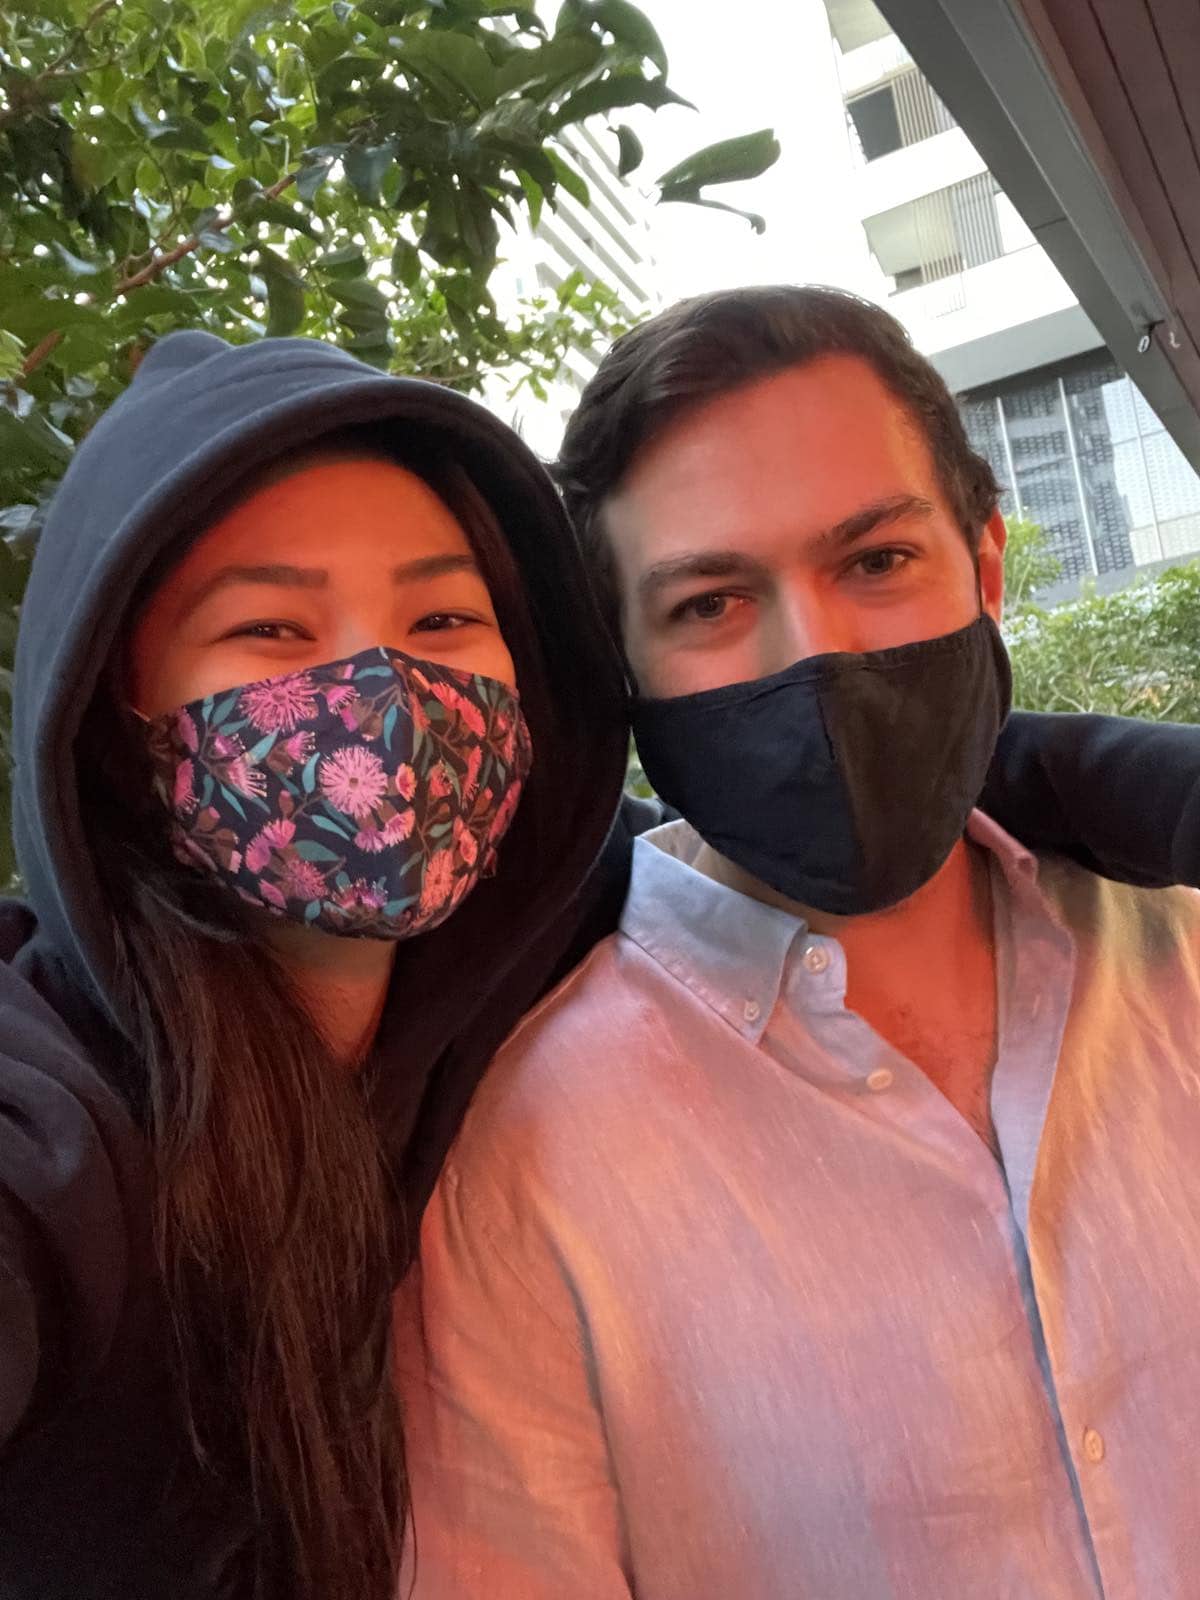 A selfie of a man and a woman, with the woman’s arm around the man’s shoulder. They both have face masks on. The woman has long dark hair and is wearing a navy hoodie and her face mask has a bright gumtree pattern on it. The man has dark hair, a have mask, and is wearing a linen shirt. There is warm red lighting projecting a slight redness on their faces.